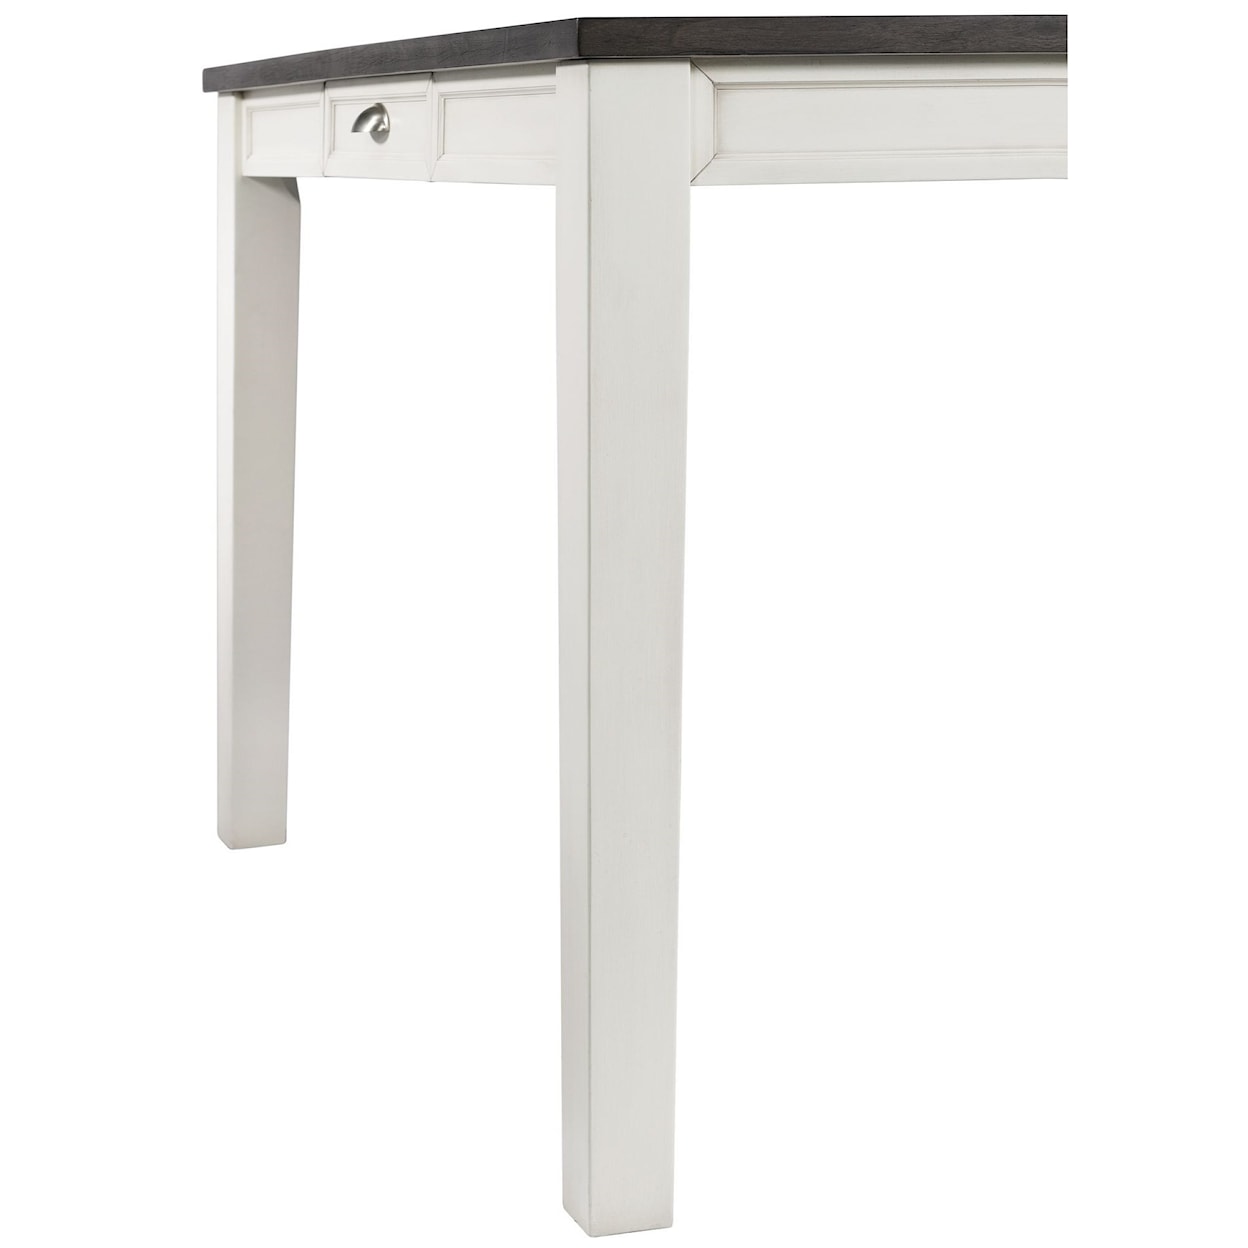 Elements International Kayla Two-Tone Counter Height Dining Table